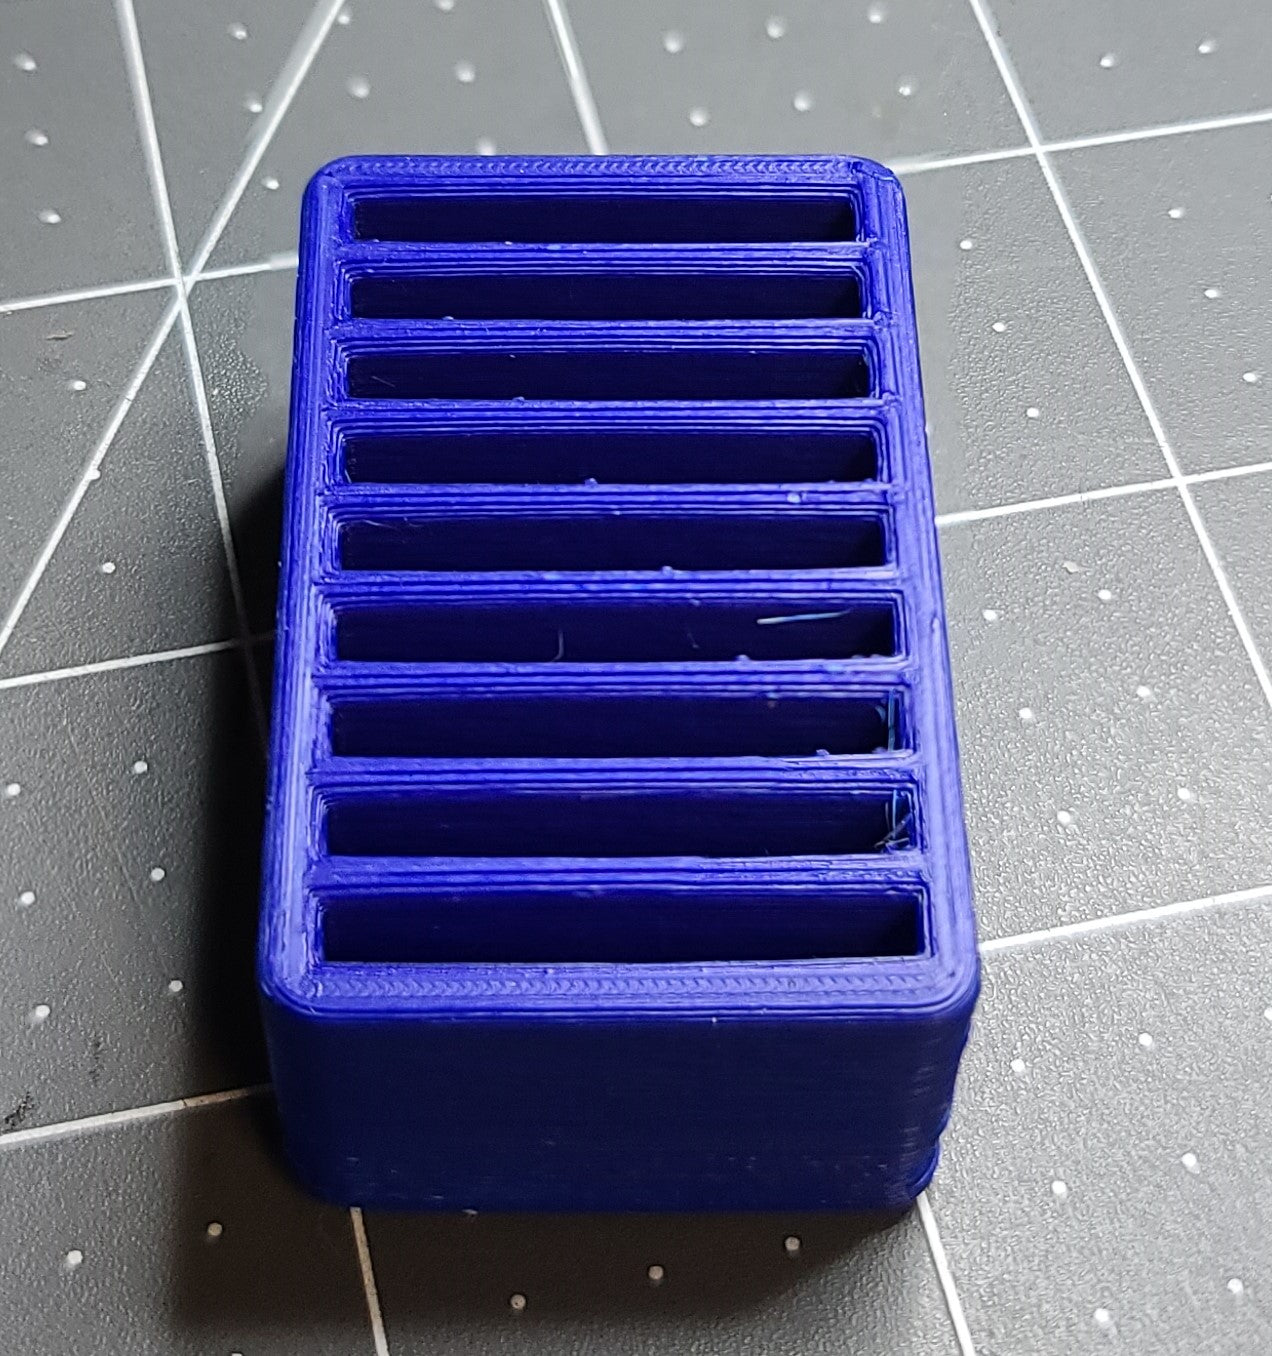 SD card holder for 9 cards